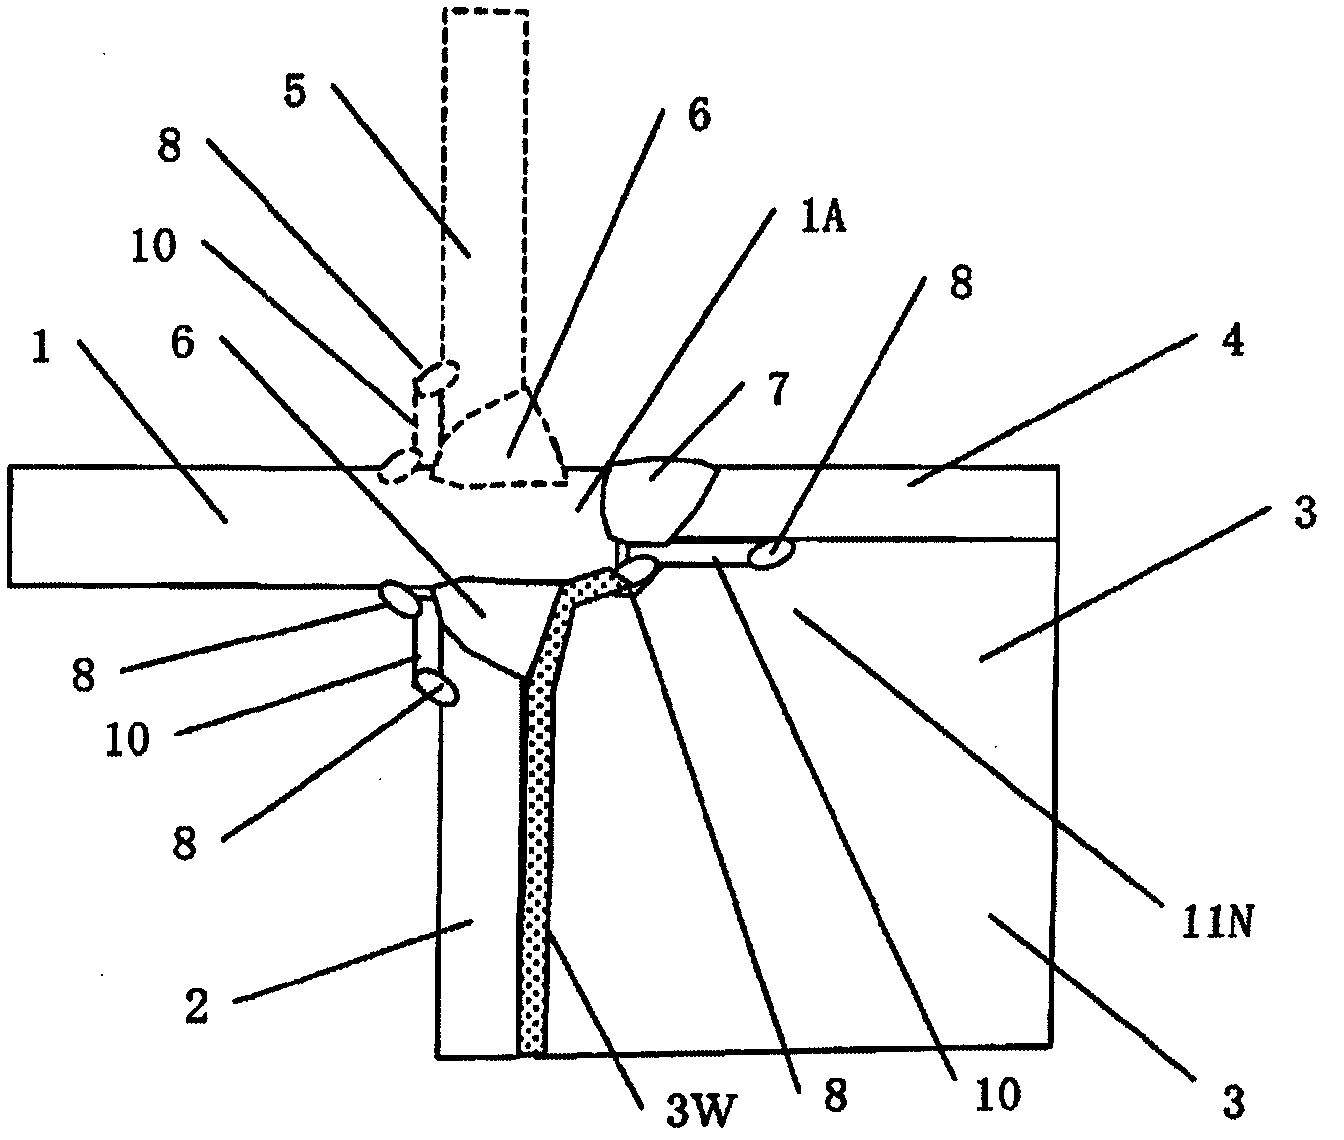 Column-beam connection structure